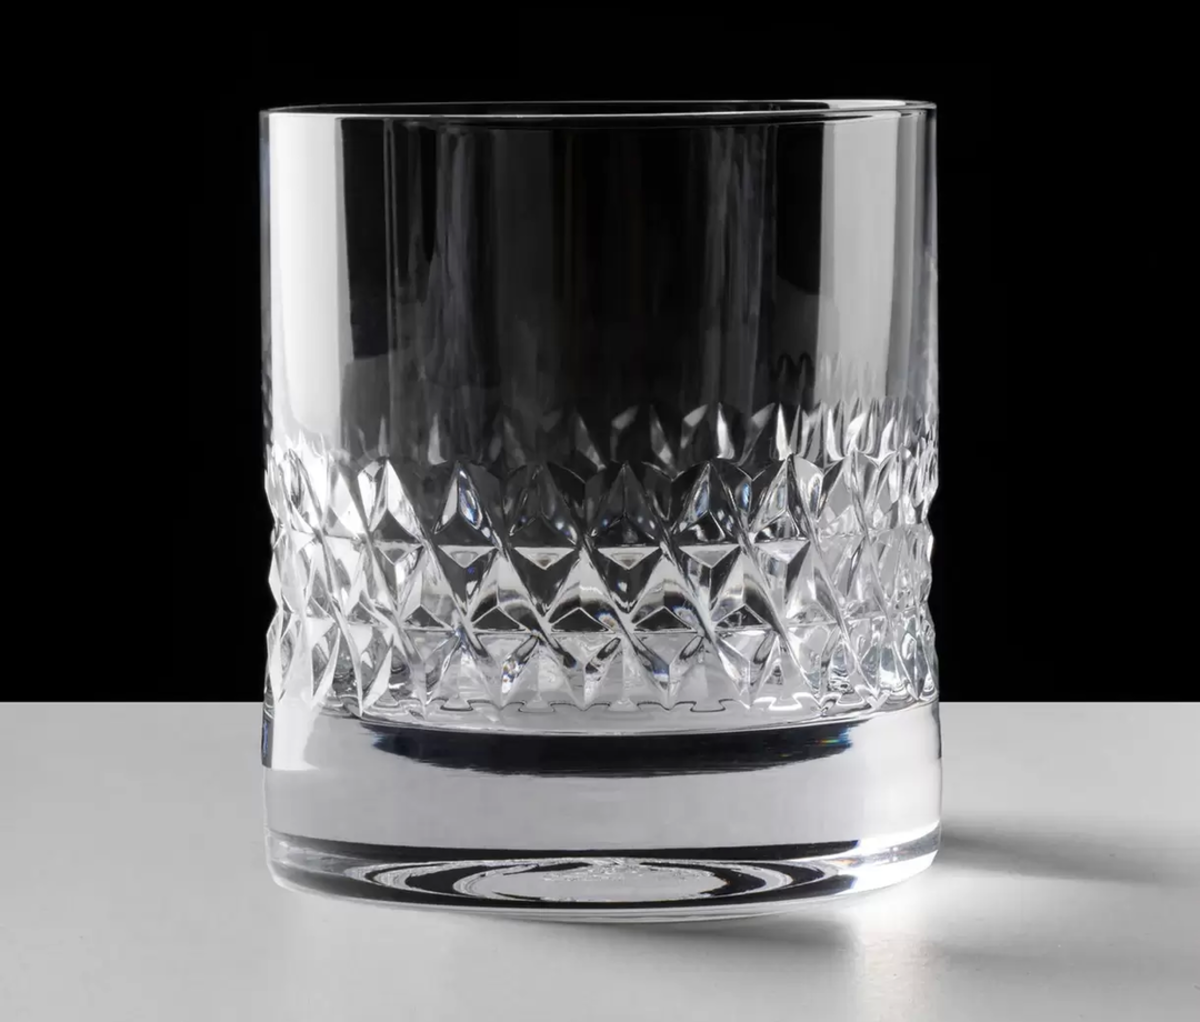 Snute Nosing Whiskey Glasses - Double-wall Insulated Crystal Whiskey Glass  - Gift for Whiskey Lovers - Set of 2 in 2023